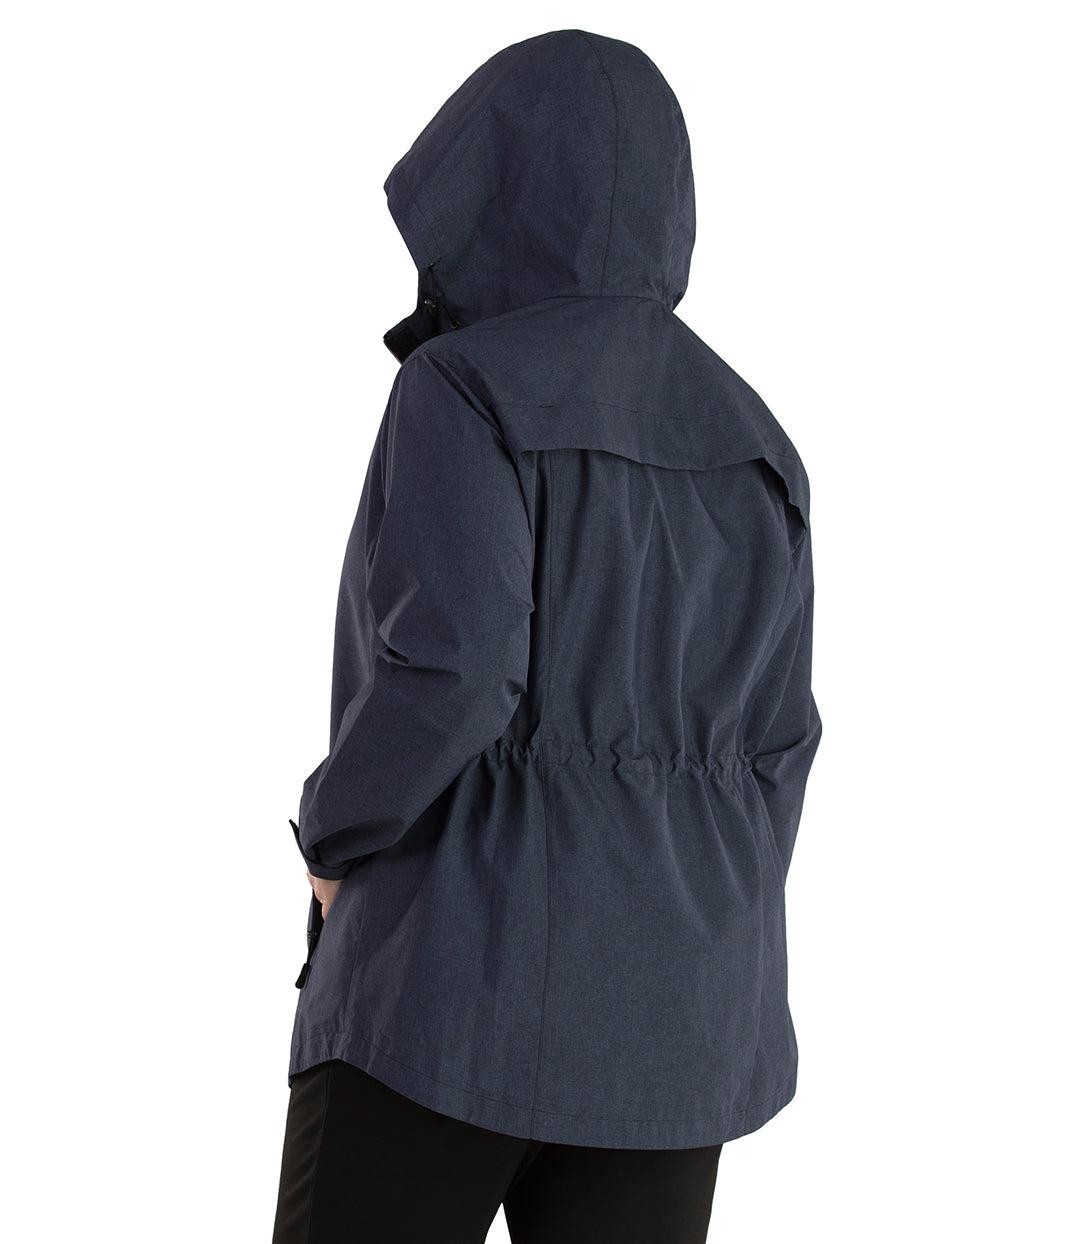 Plus size woman, back view with hood up, wearing a JunoActive plus size Waterproof Breathable Wind & Rain Jacket in navy blue. The jacket has a cinched waist, hood, double front closure, vent at back shoulder and side pockets at the hip. The length of the plus size jacket hits just below the hips.